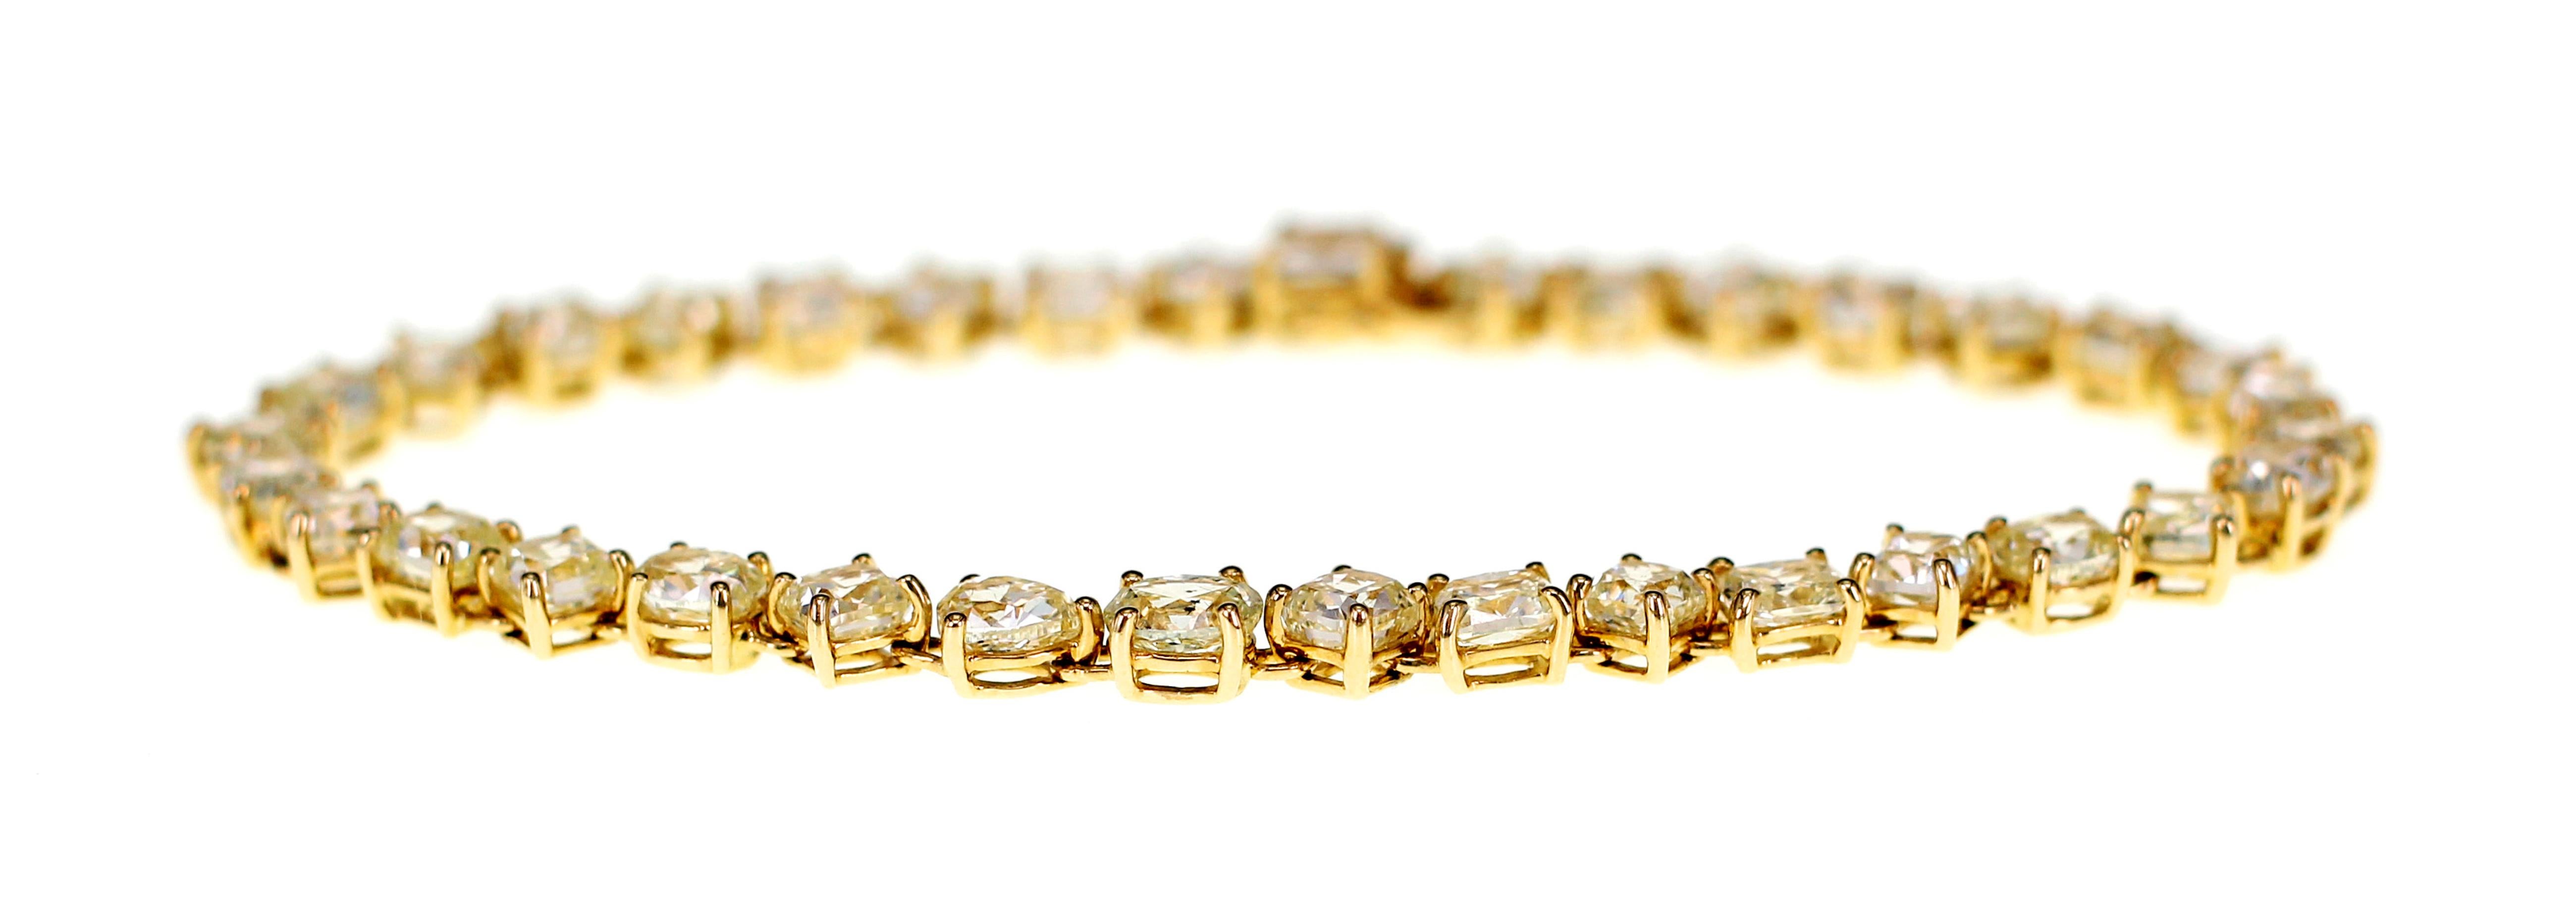 A total of 10.68 carat of yellow diamond are set in a yellow gold 18 K bracelet. The bracelet is from the Havana Collection and all the pieces are set individually on this bracelet by hand.